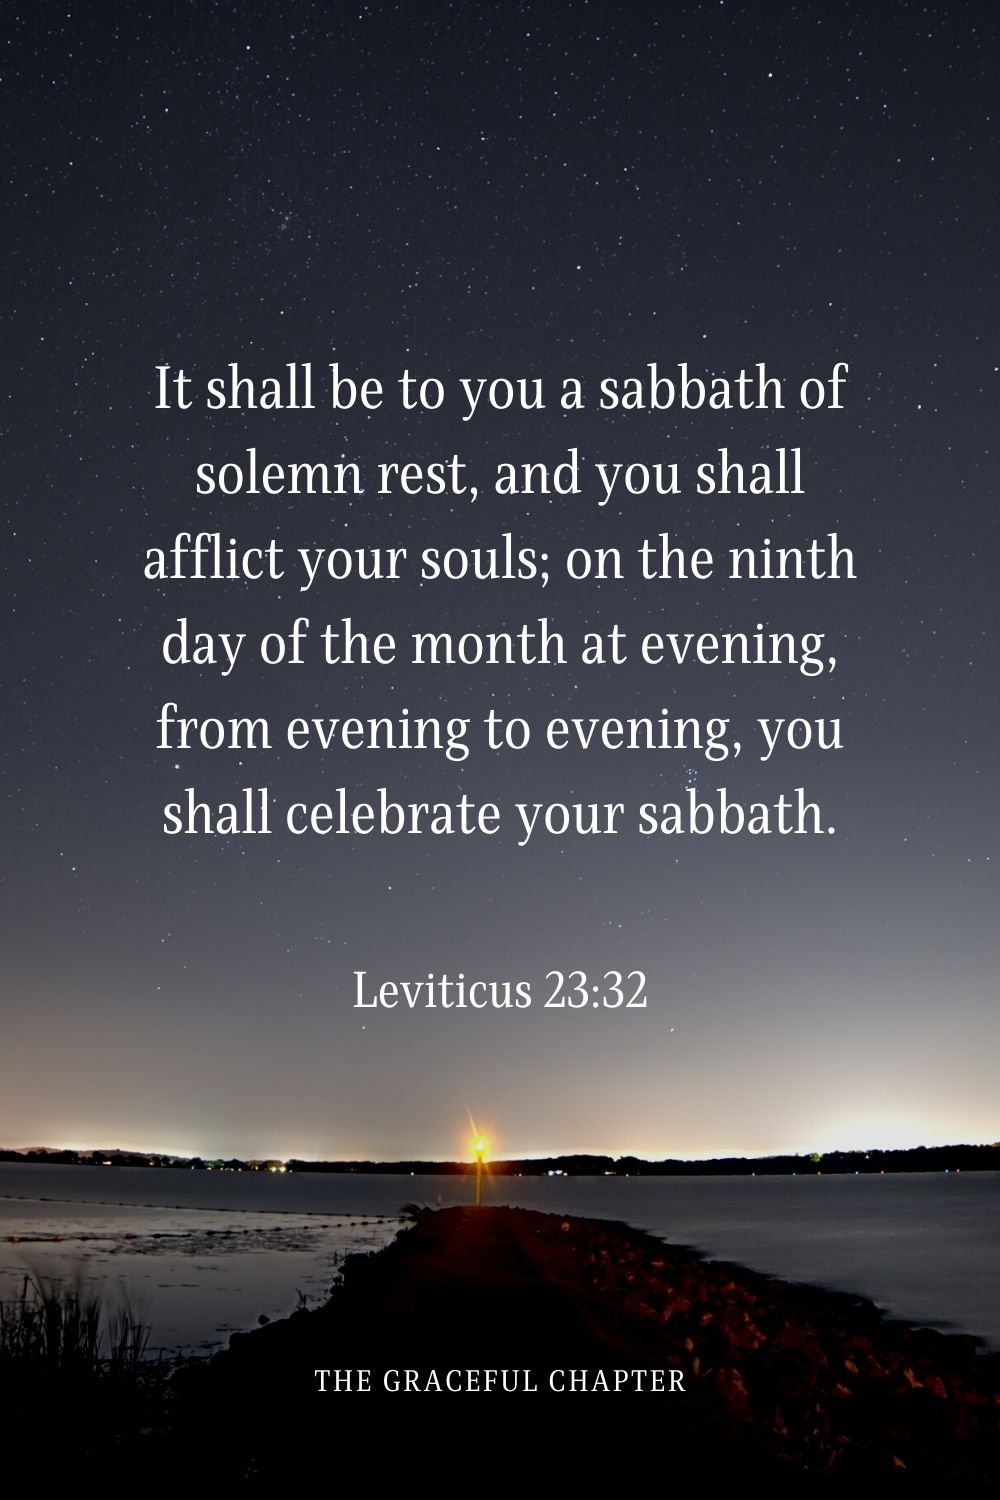 It shall be to you a sabbath of solemn rest, and you shall afflict your souls; on the ninth day of the month at evening, from evening to evening, you shall celebrate your sabbath.